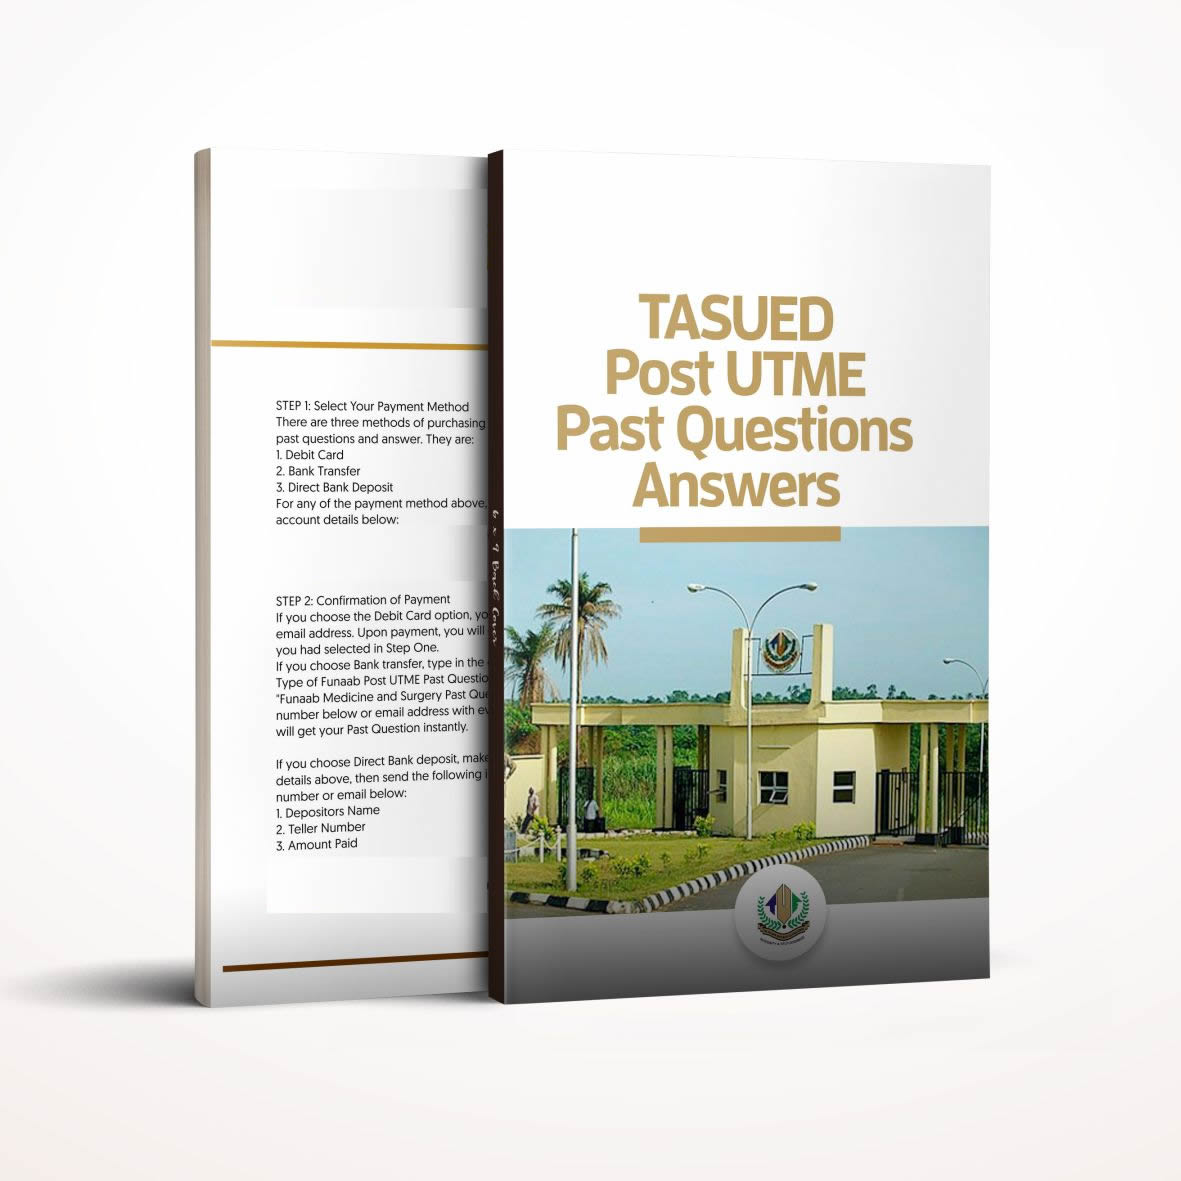 TASUED Post UTME past questions and answers